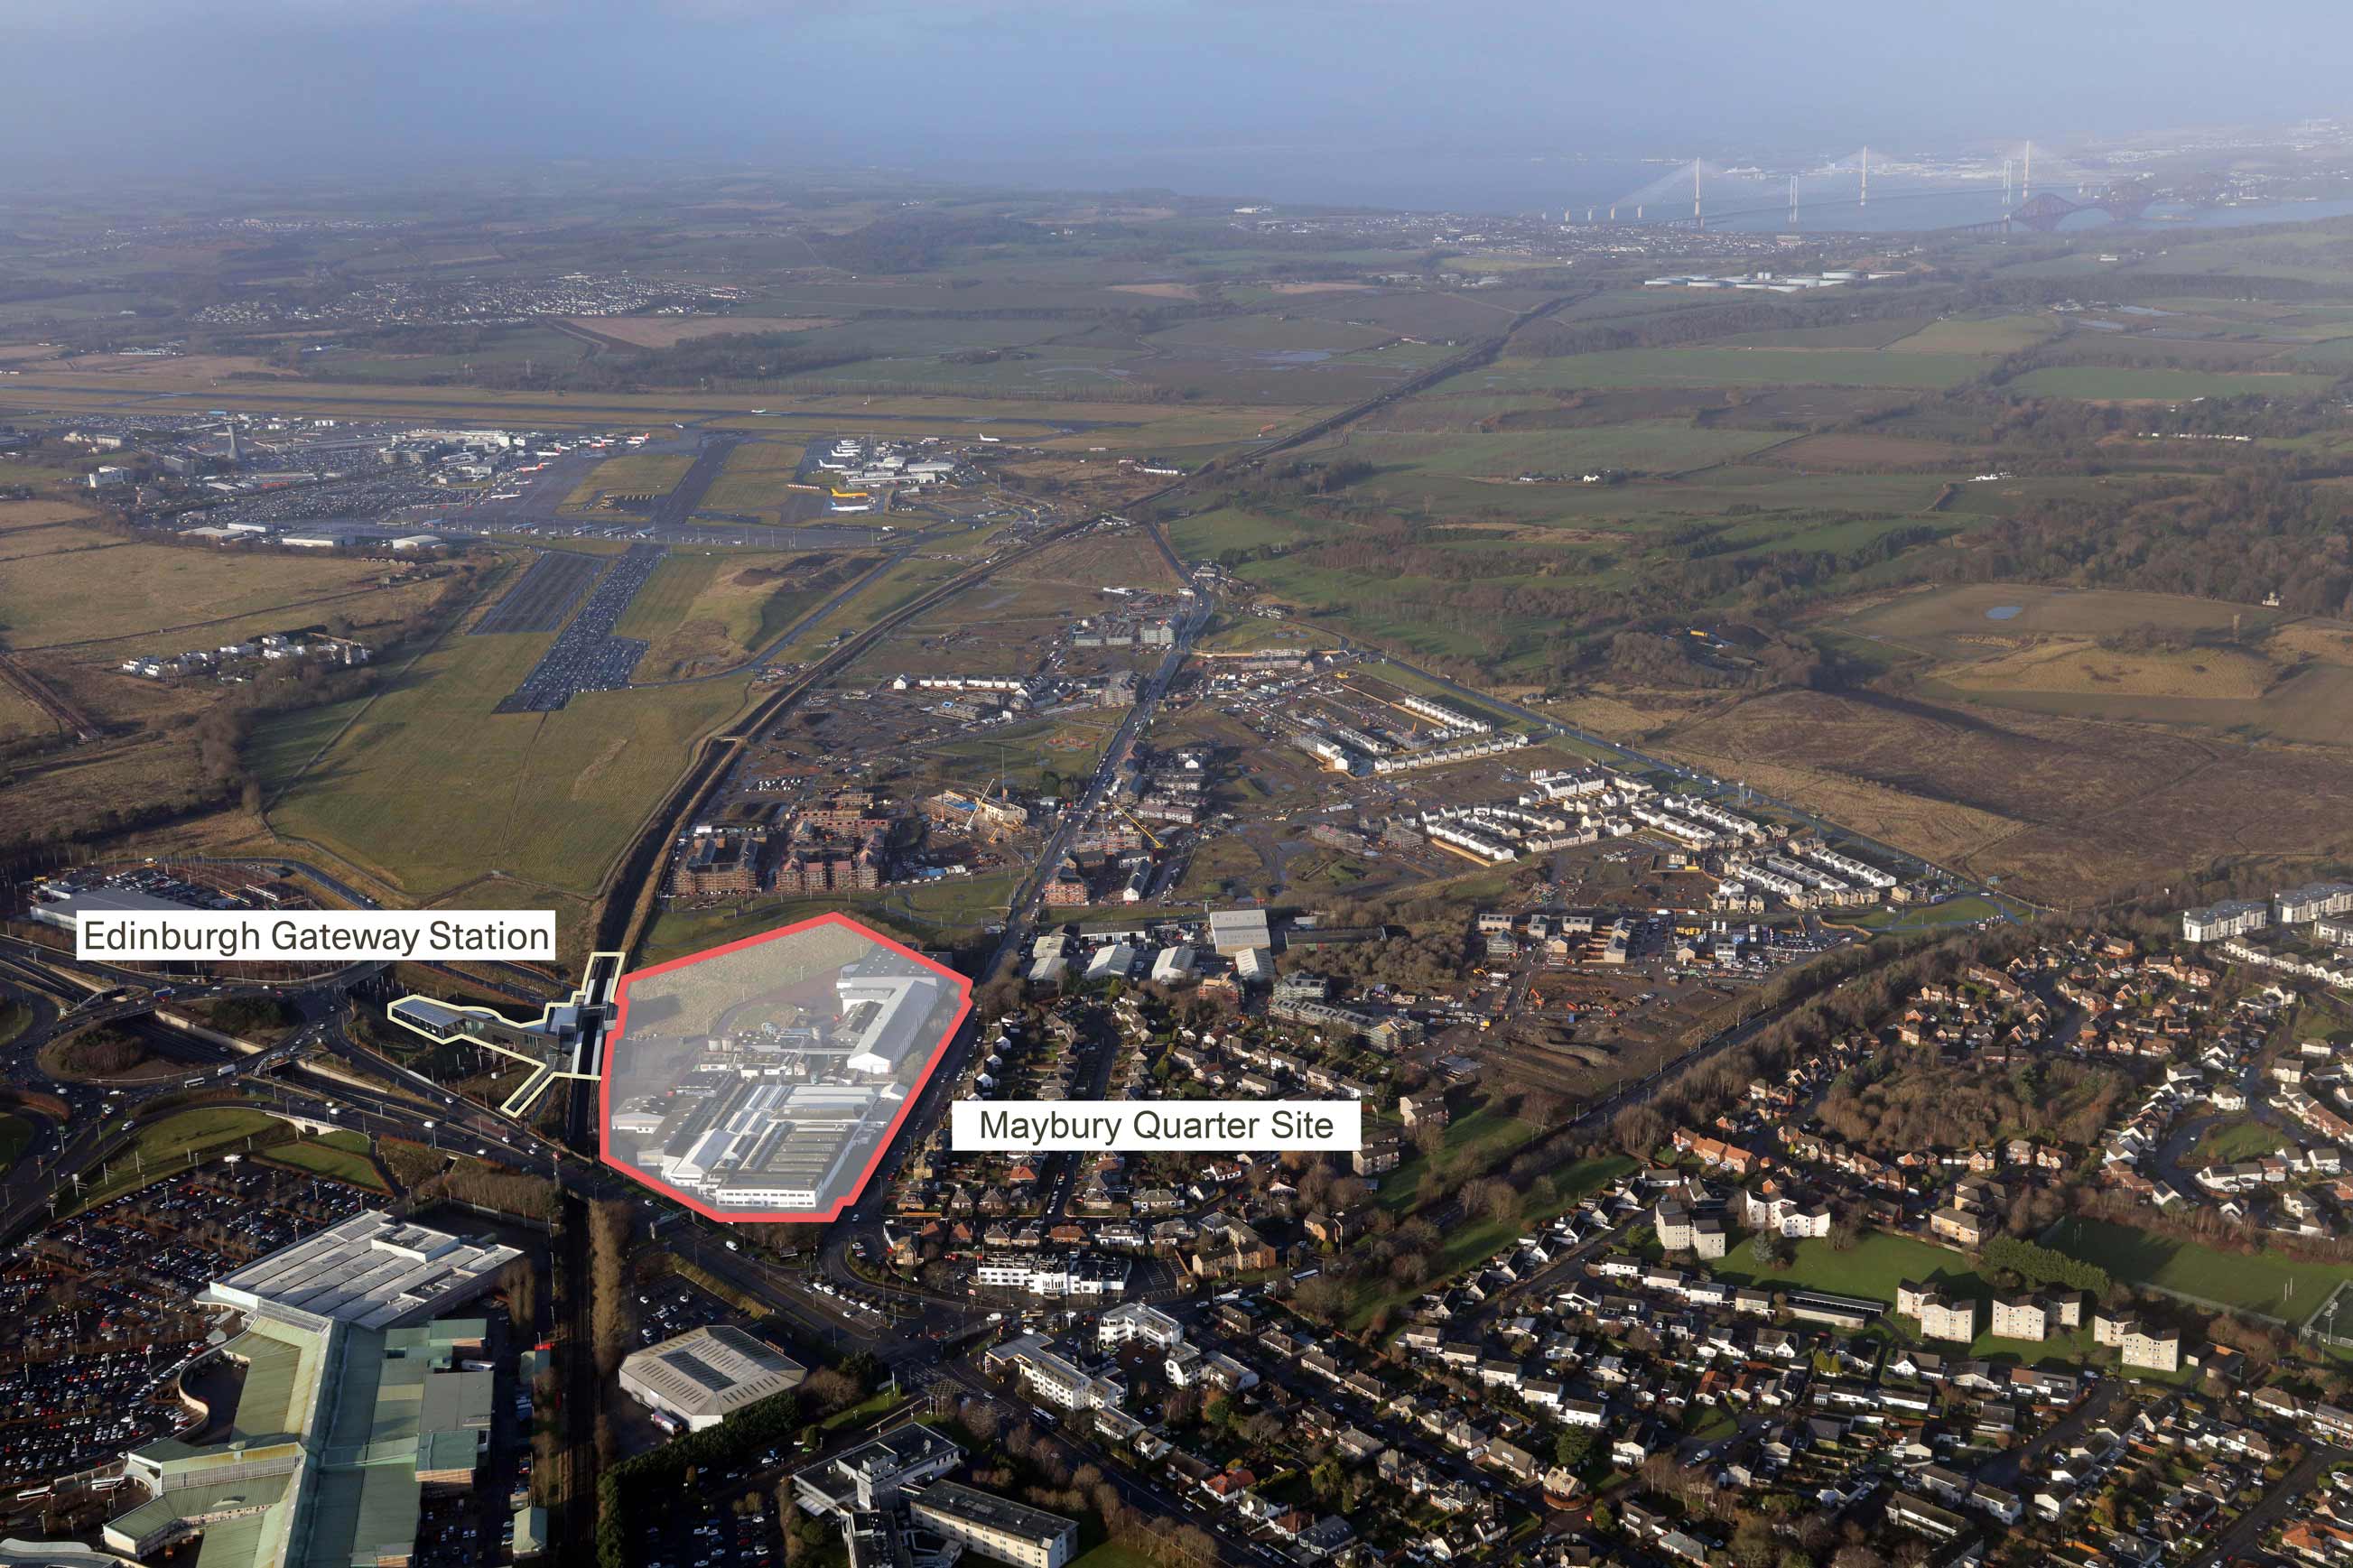 Residential-led development proposals for former Saica site go on show